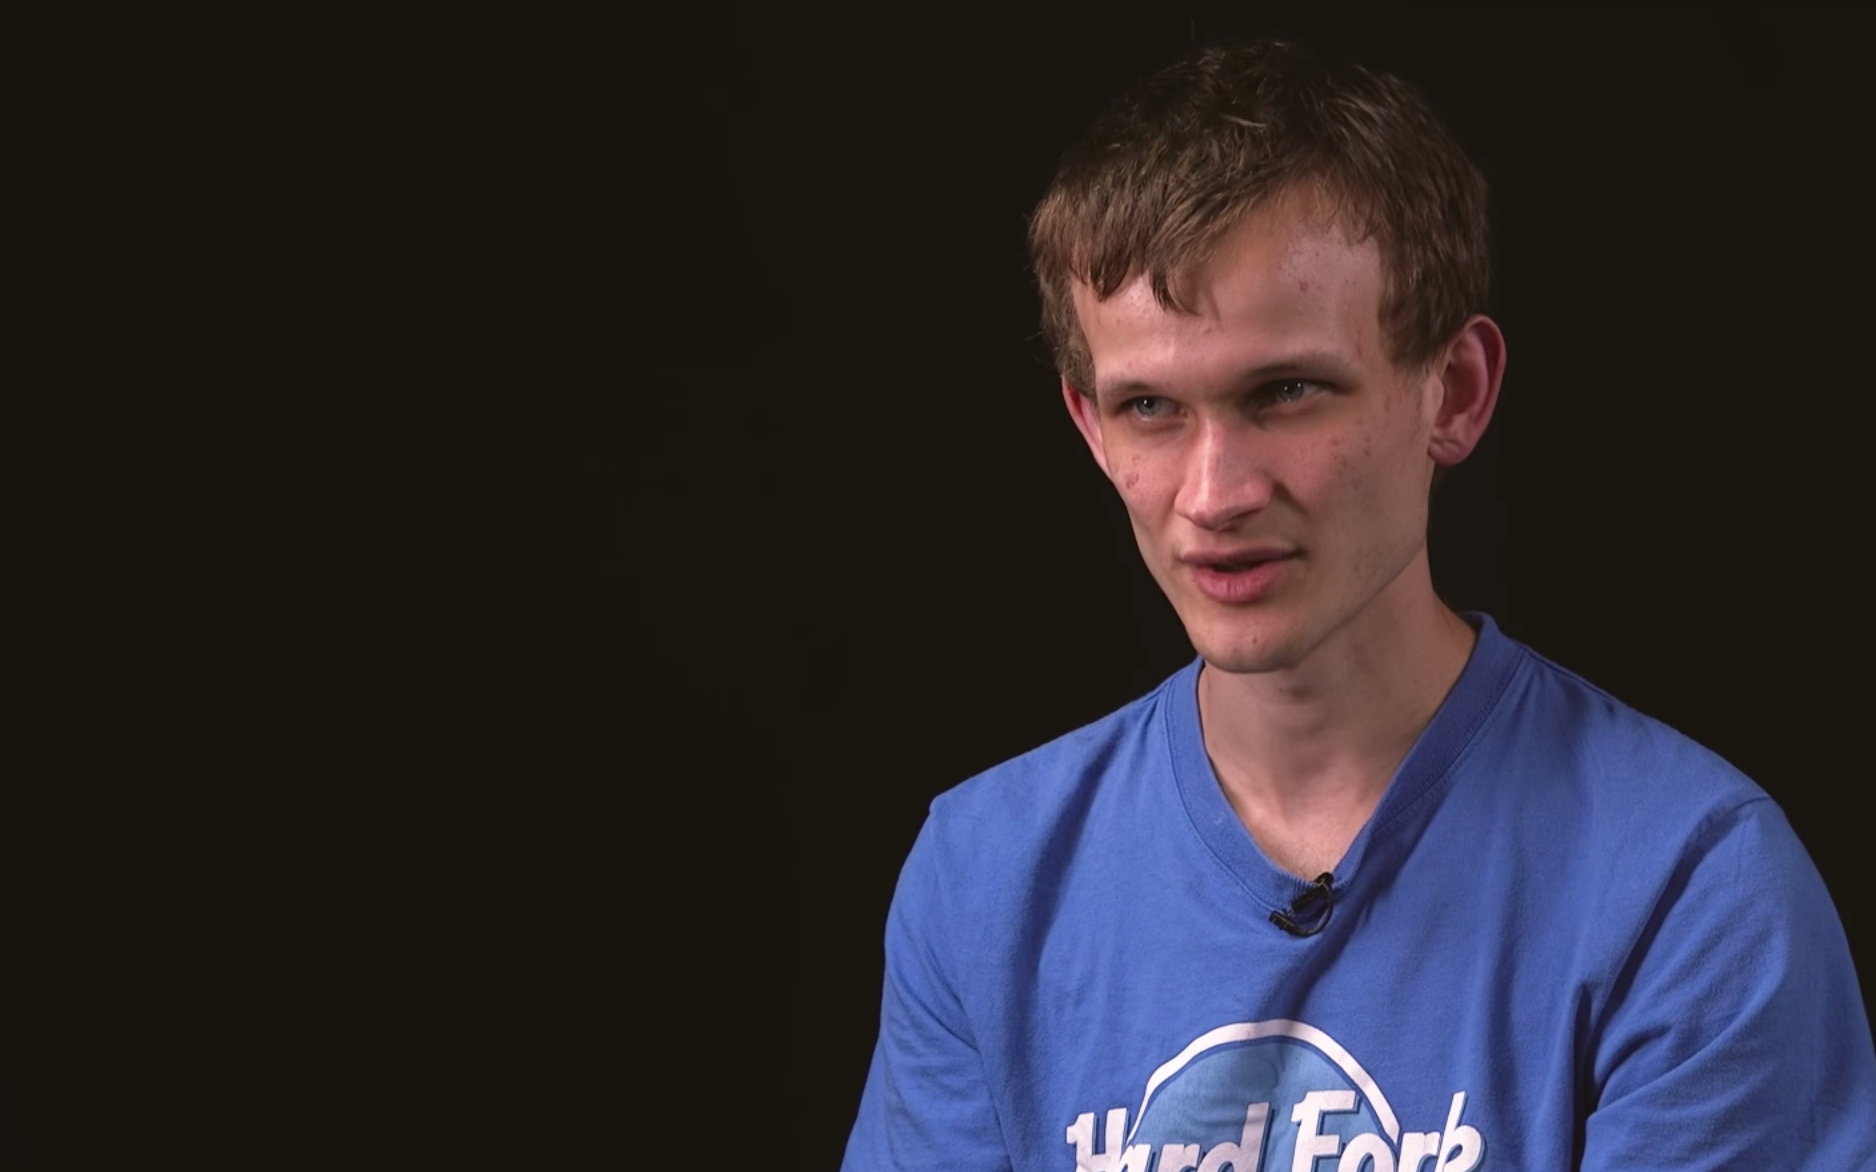 Ethereum Creator, Vitalik Buterin, says Network Will Scale to 100k TPS Before 2.0